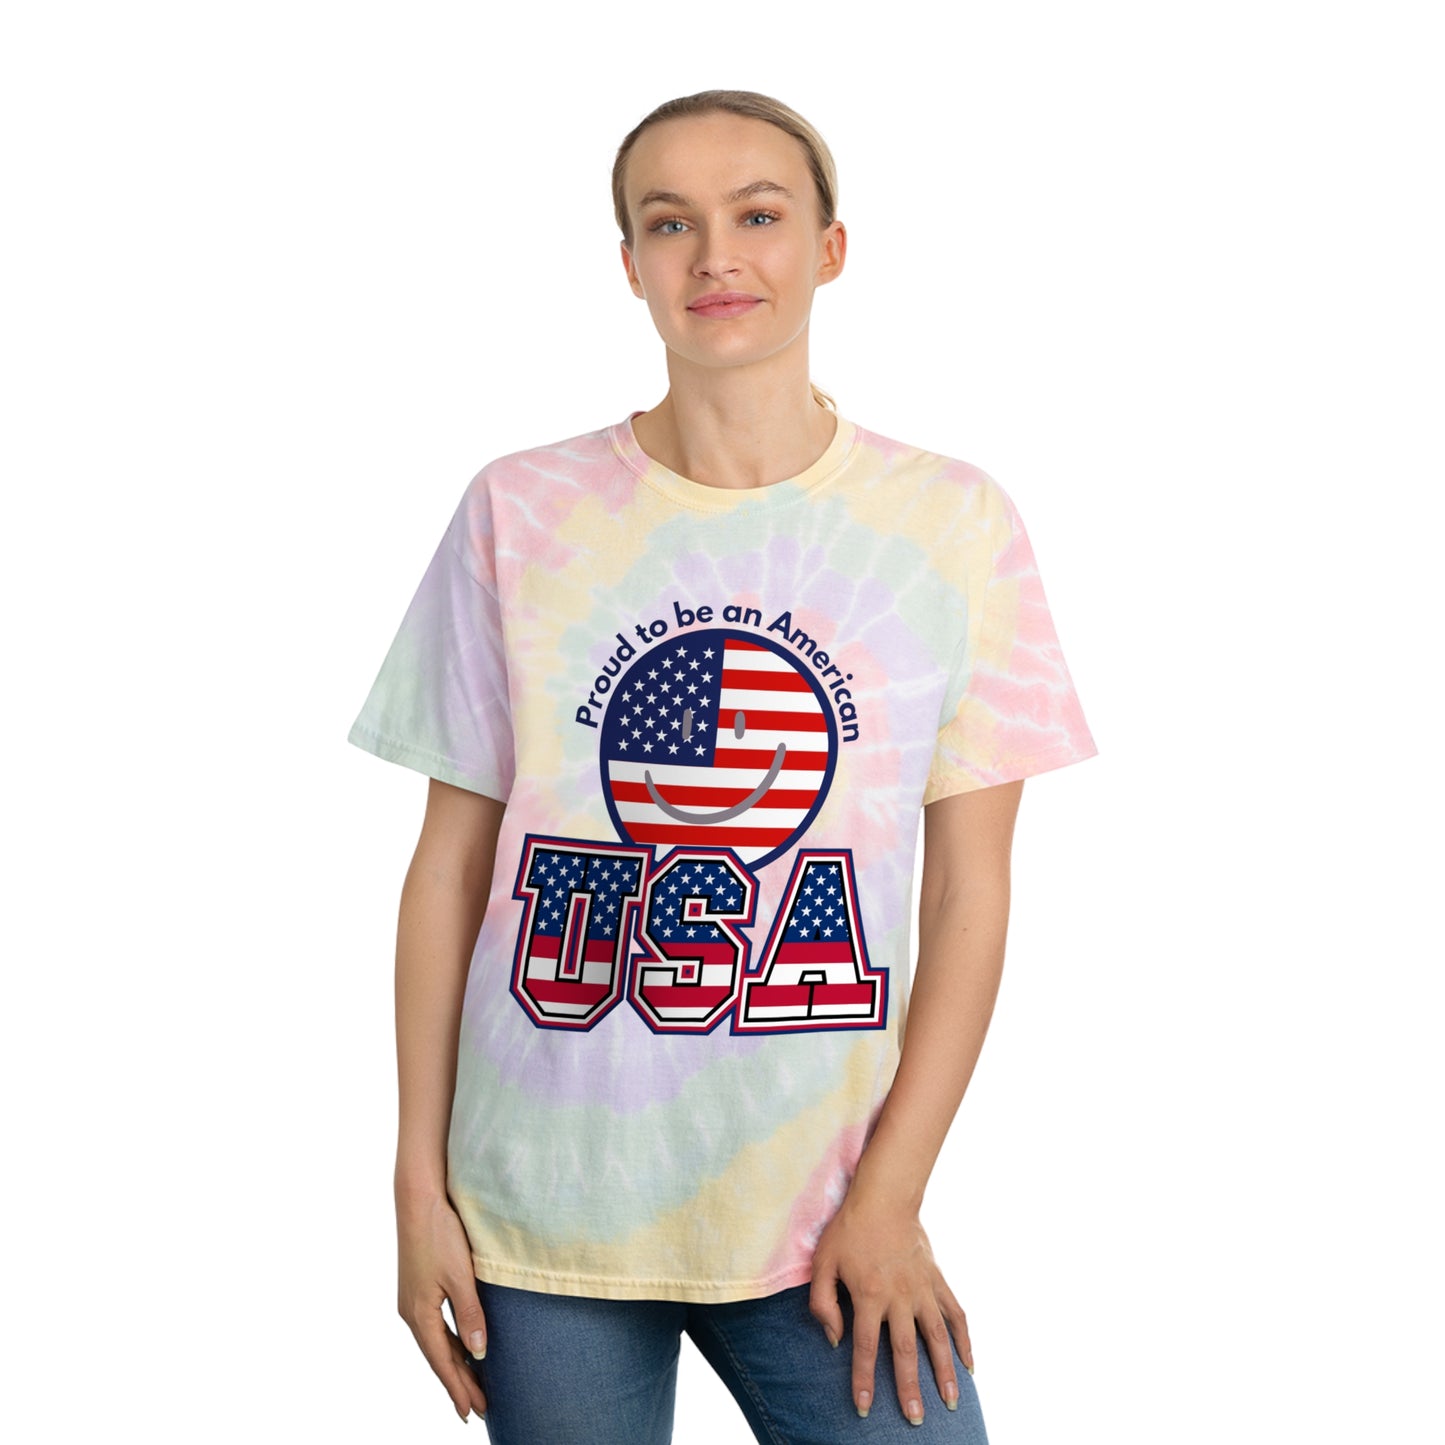 USA Flag Tie-Dye T-Shirt (Proud To Be An American)